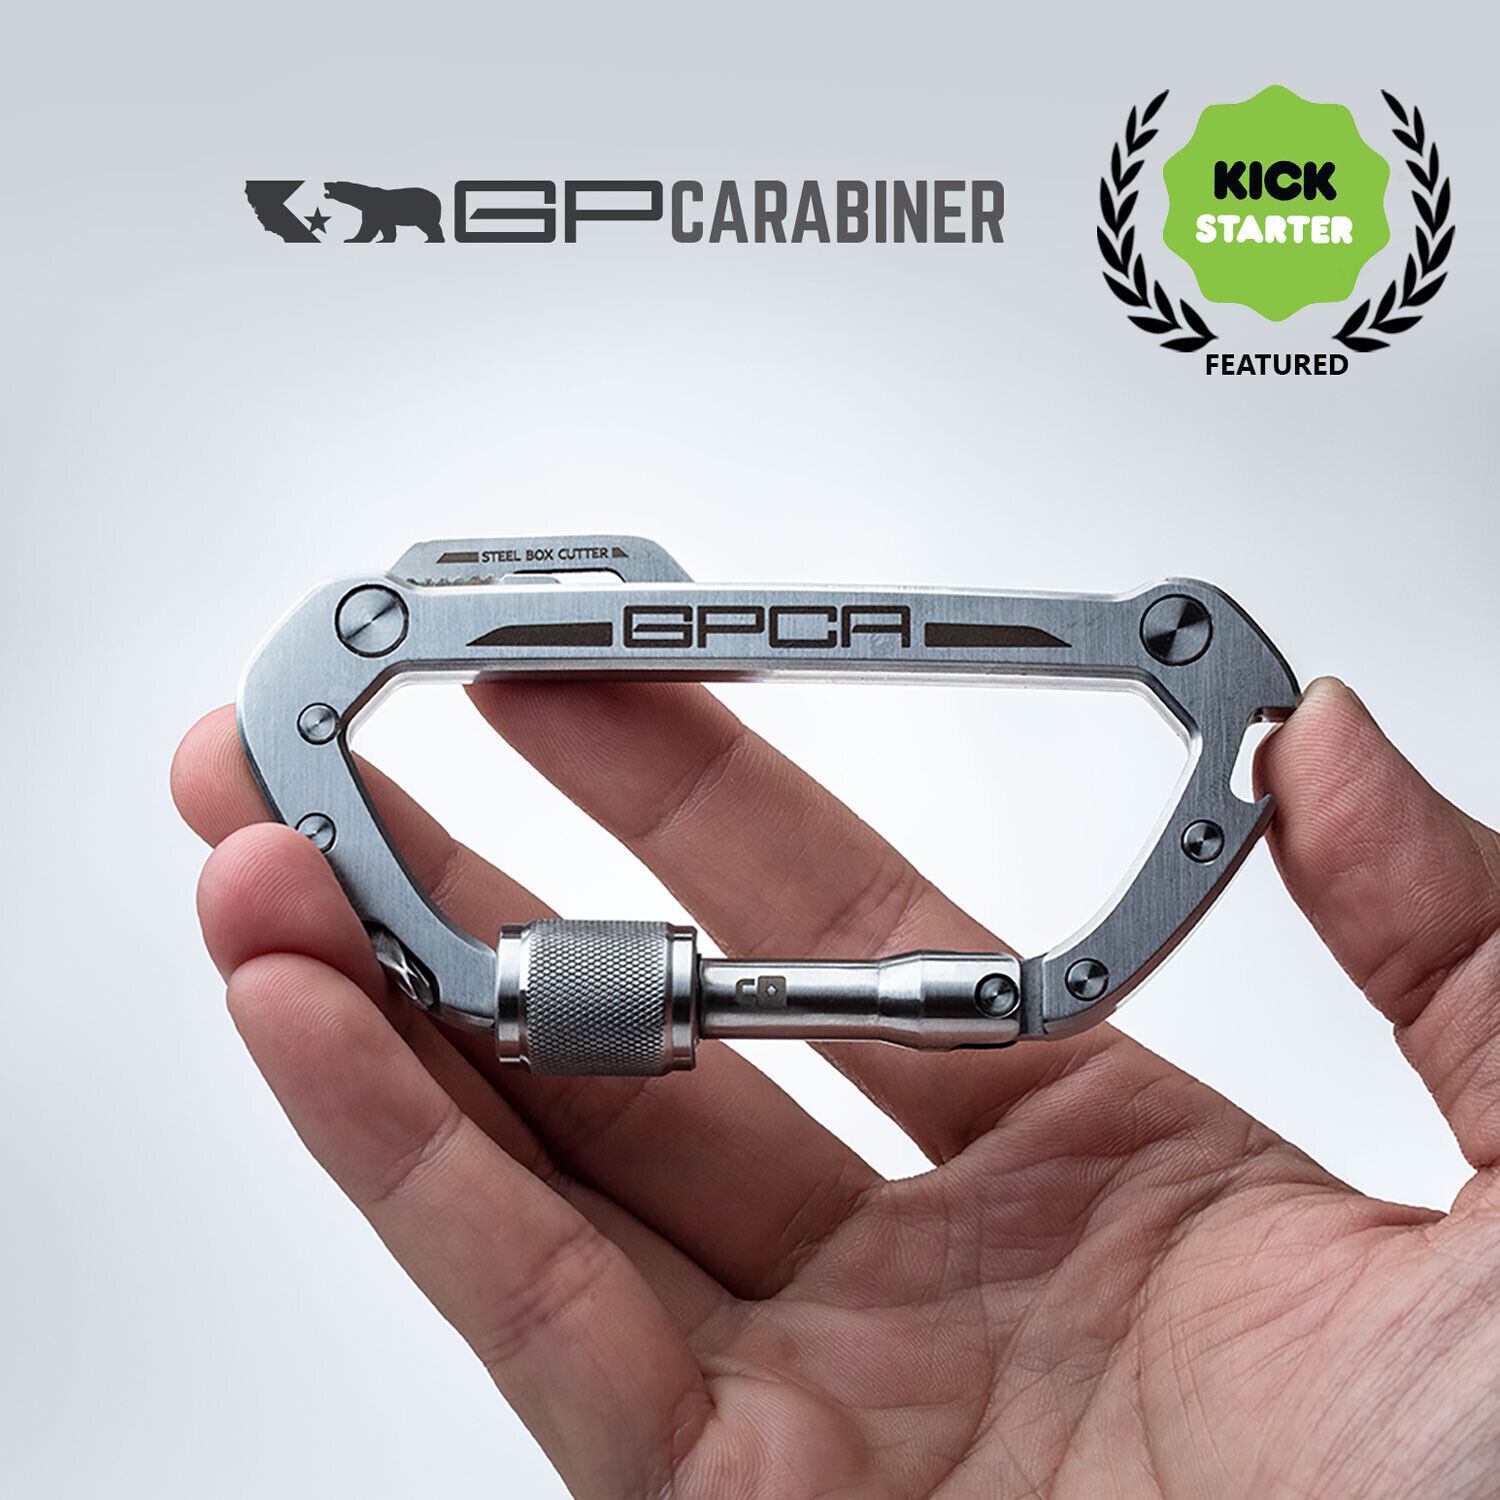 GPCA carabiners just arrived